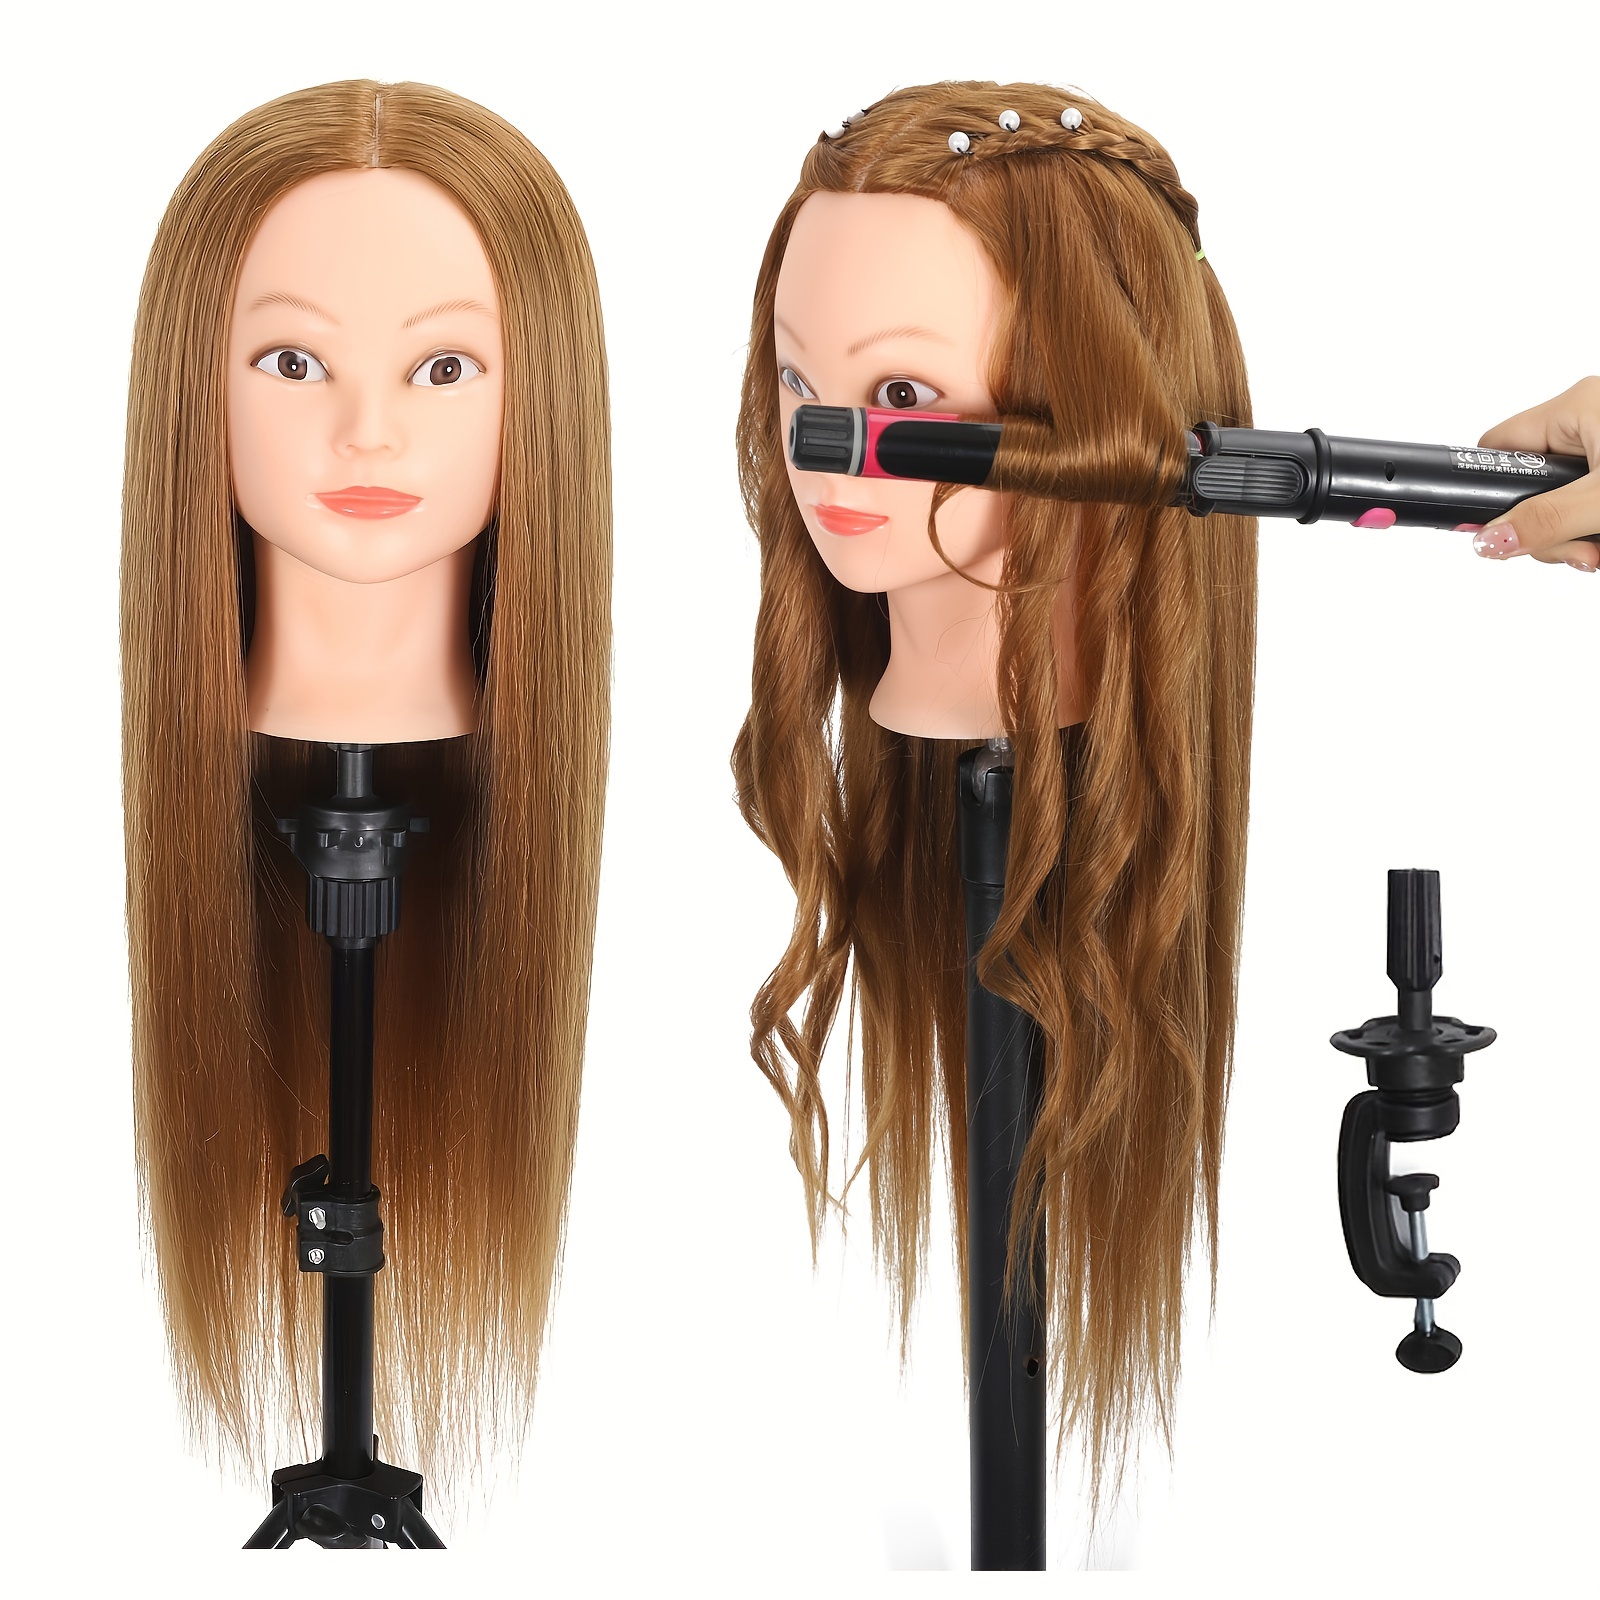  Yekavo Mannequin Head with 80% Real Hair Styling 26